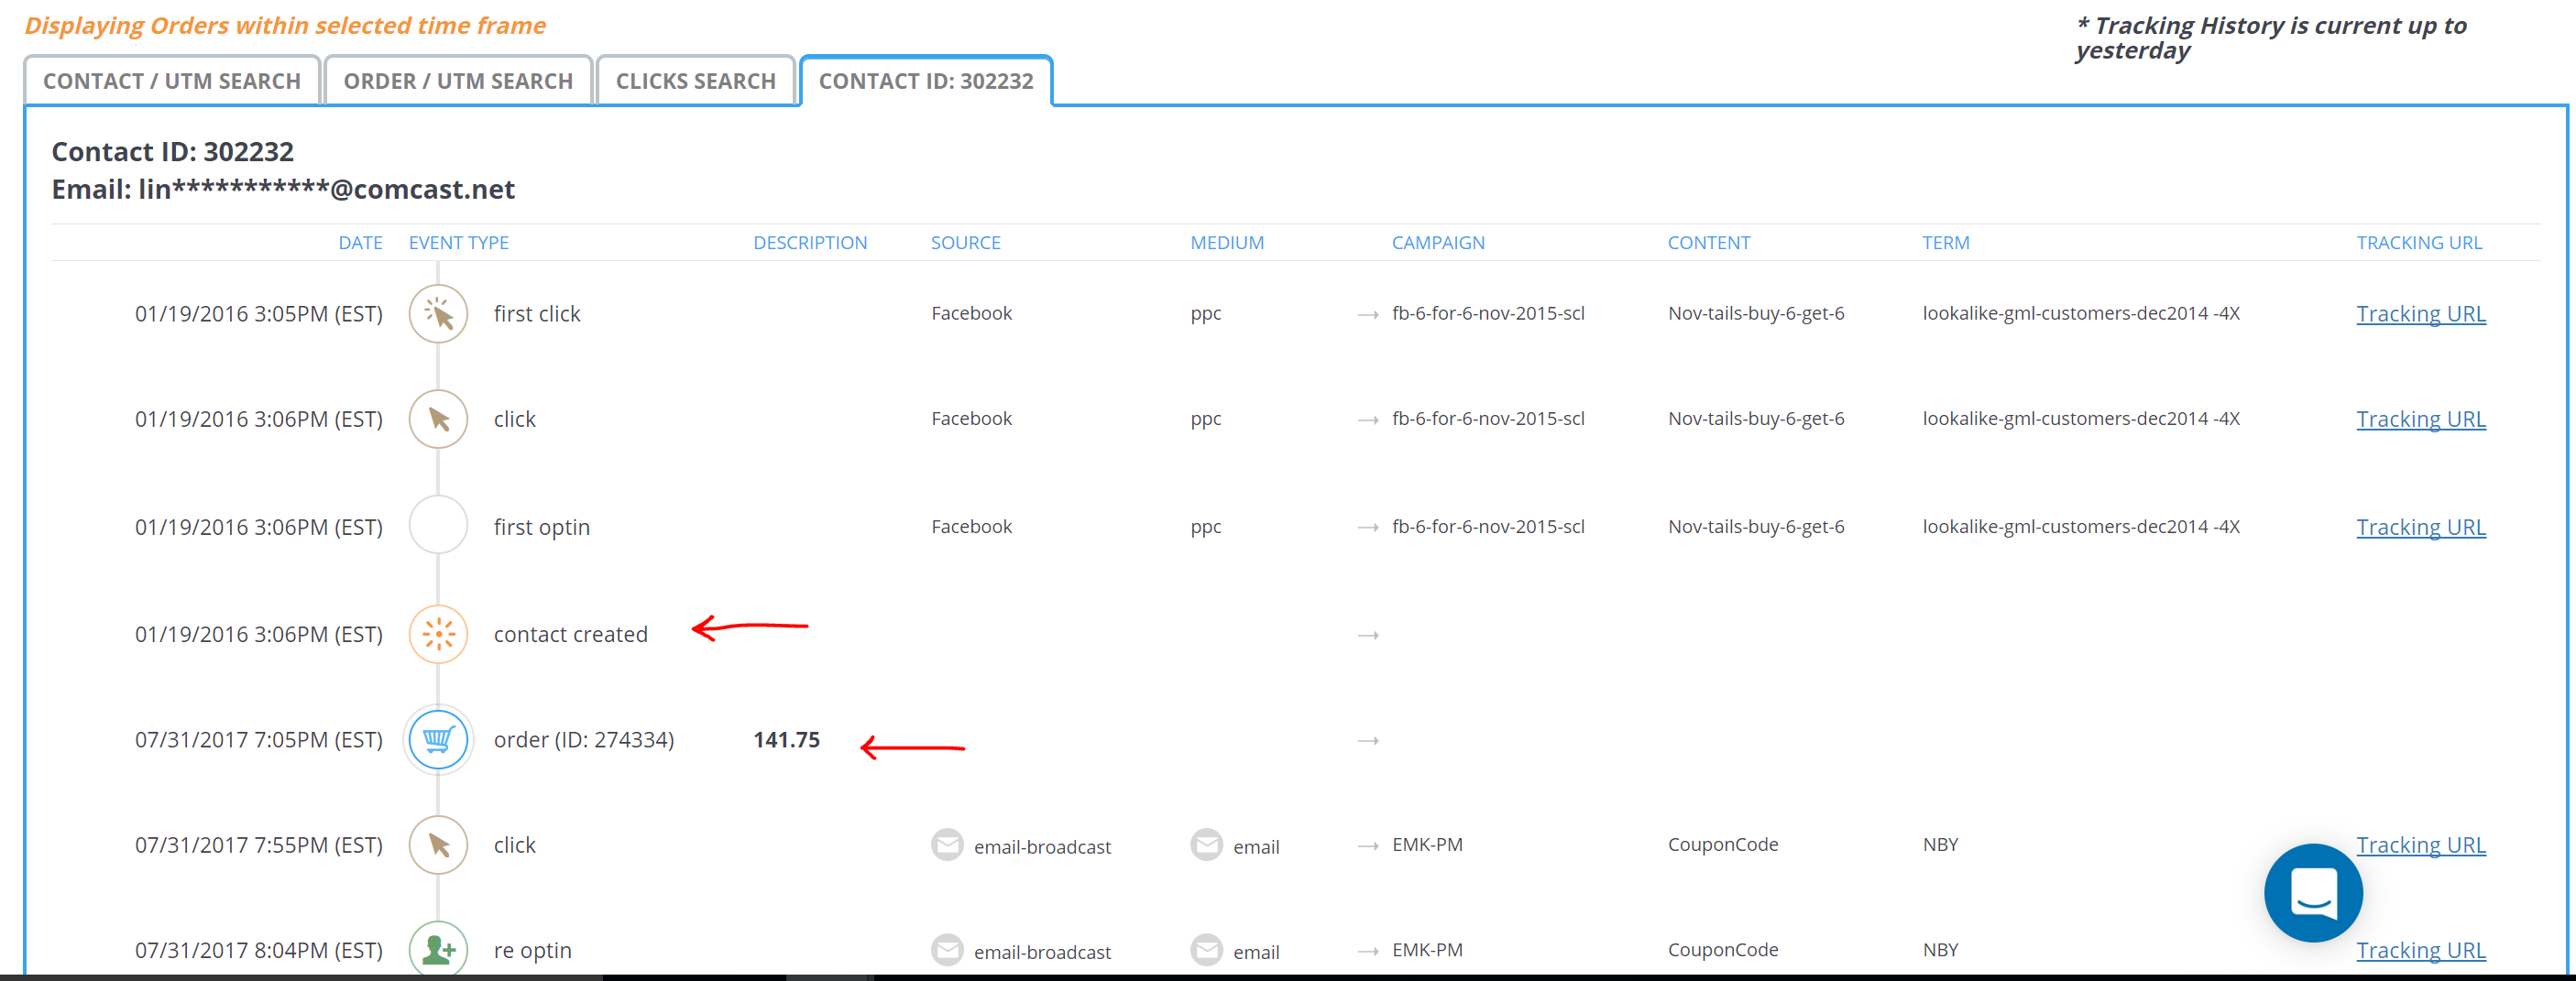 wicked reports If You Add Orders To Your CRM via an API or 3rd Party Tool